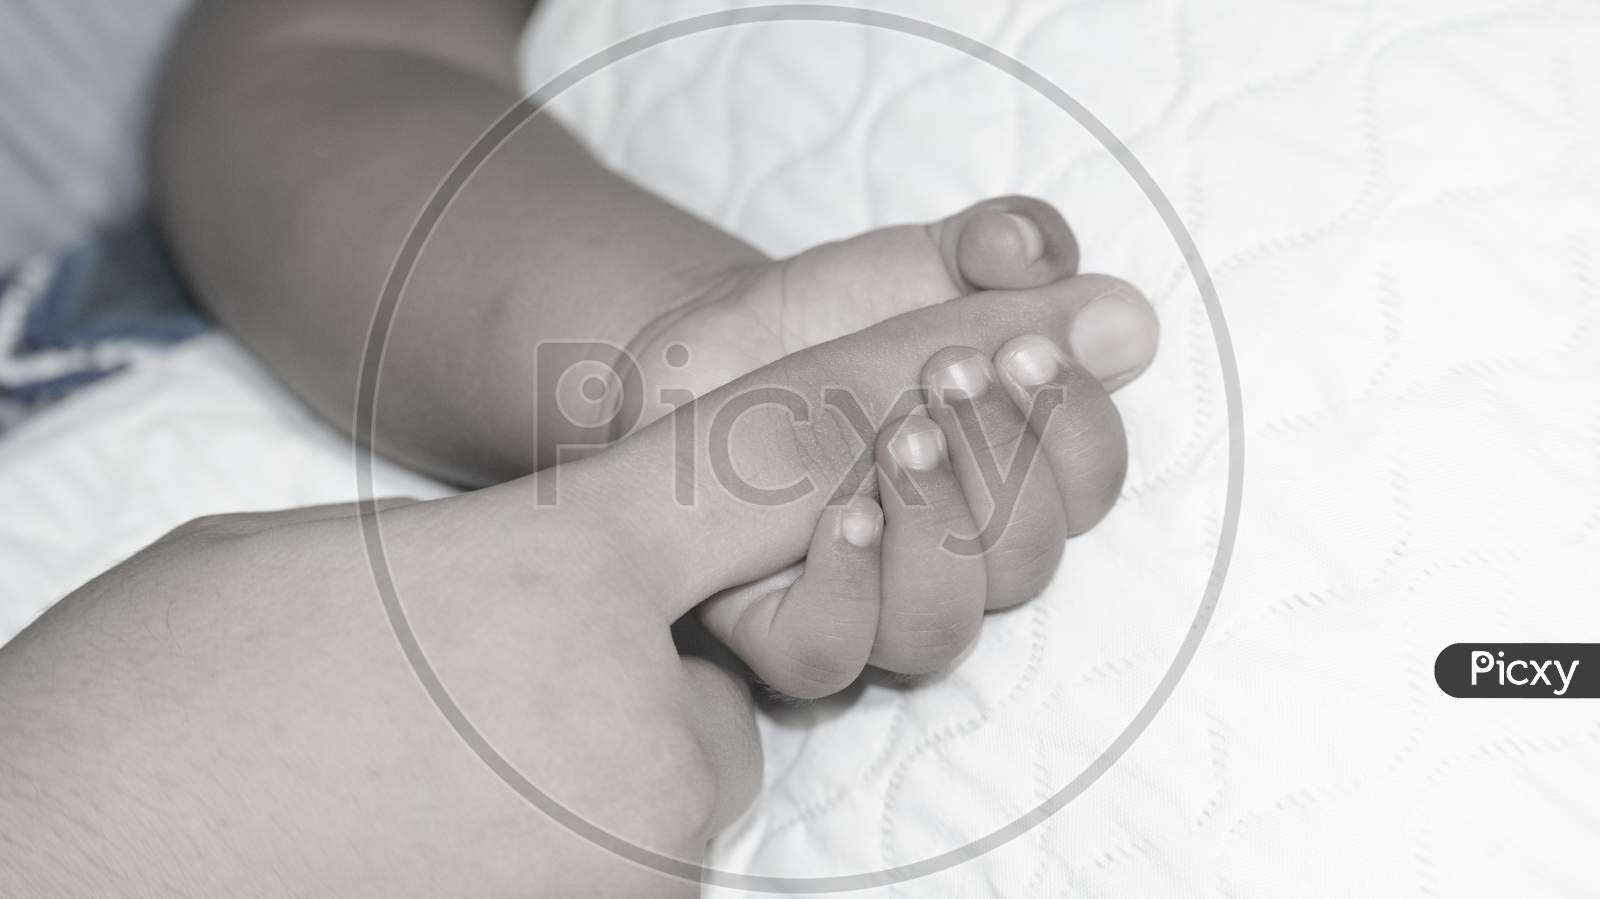 baby holding the mother's finger